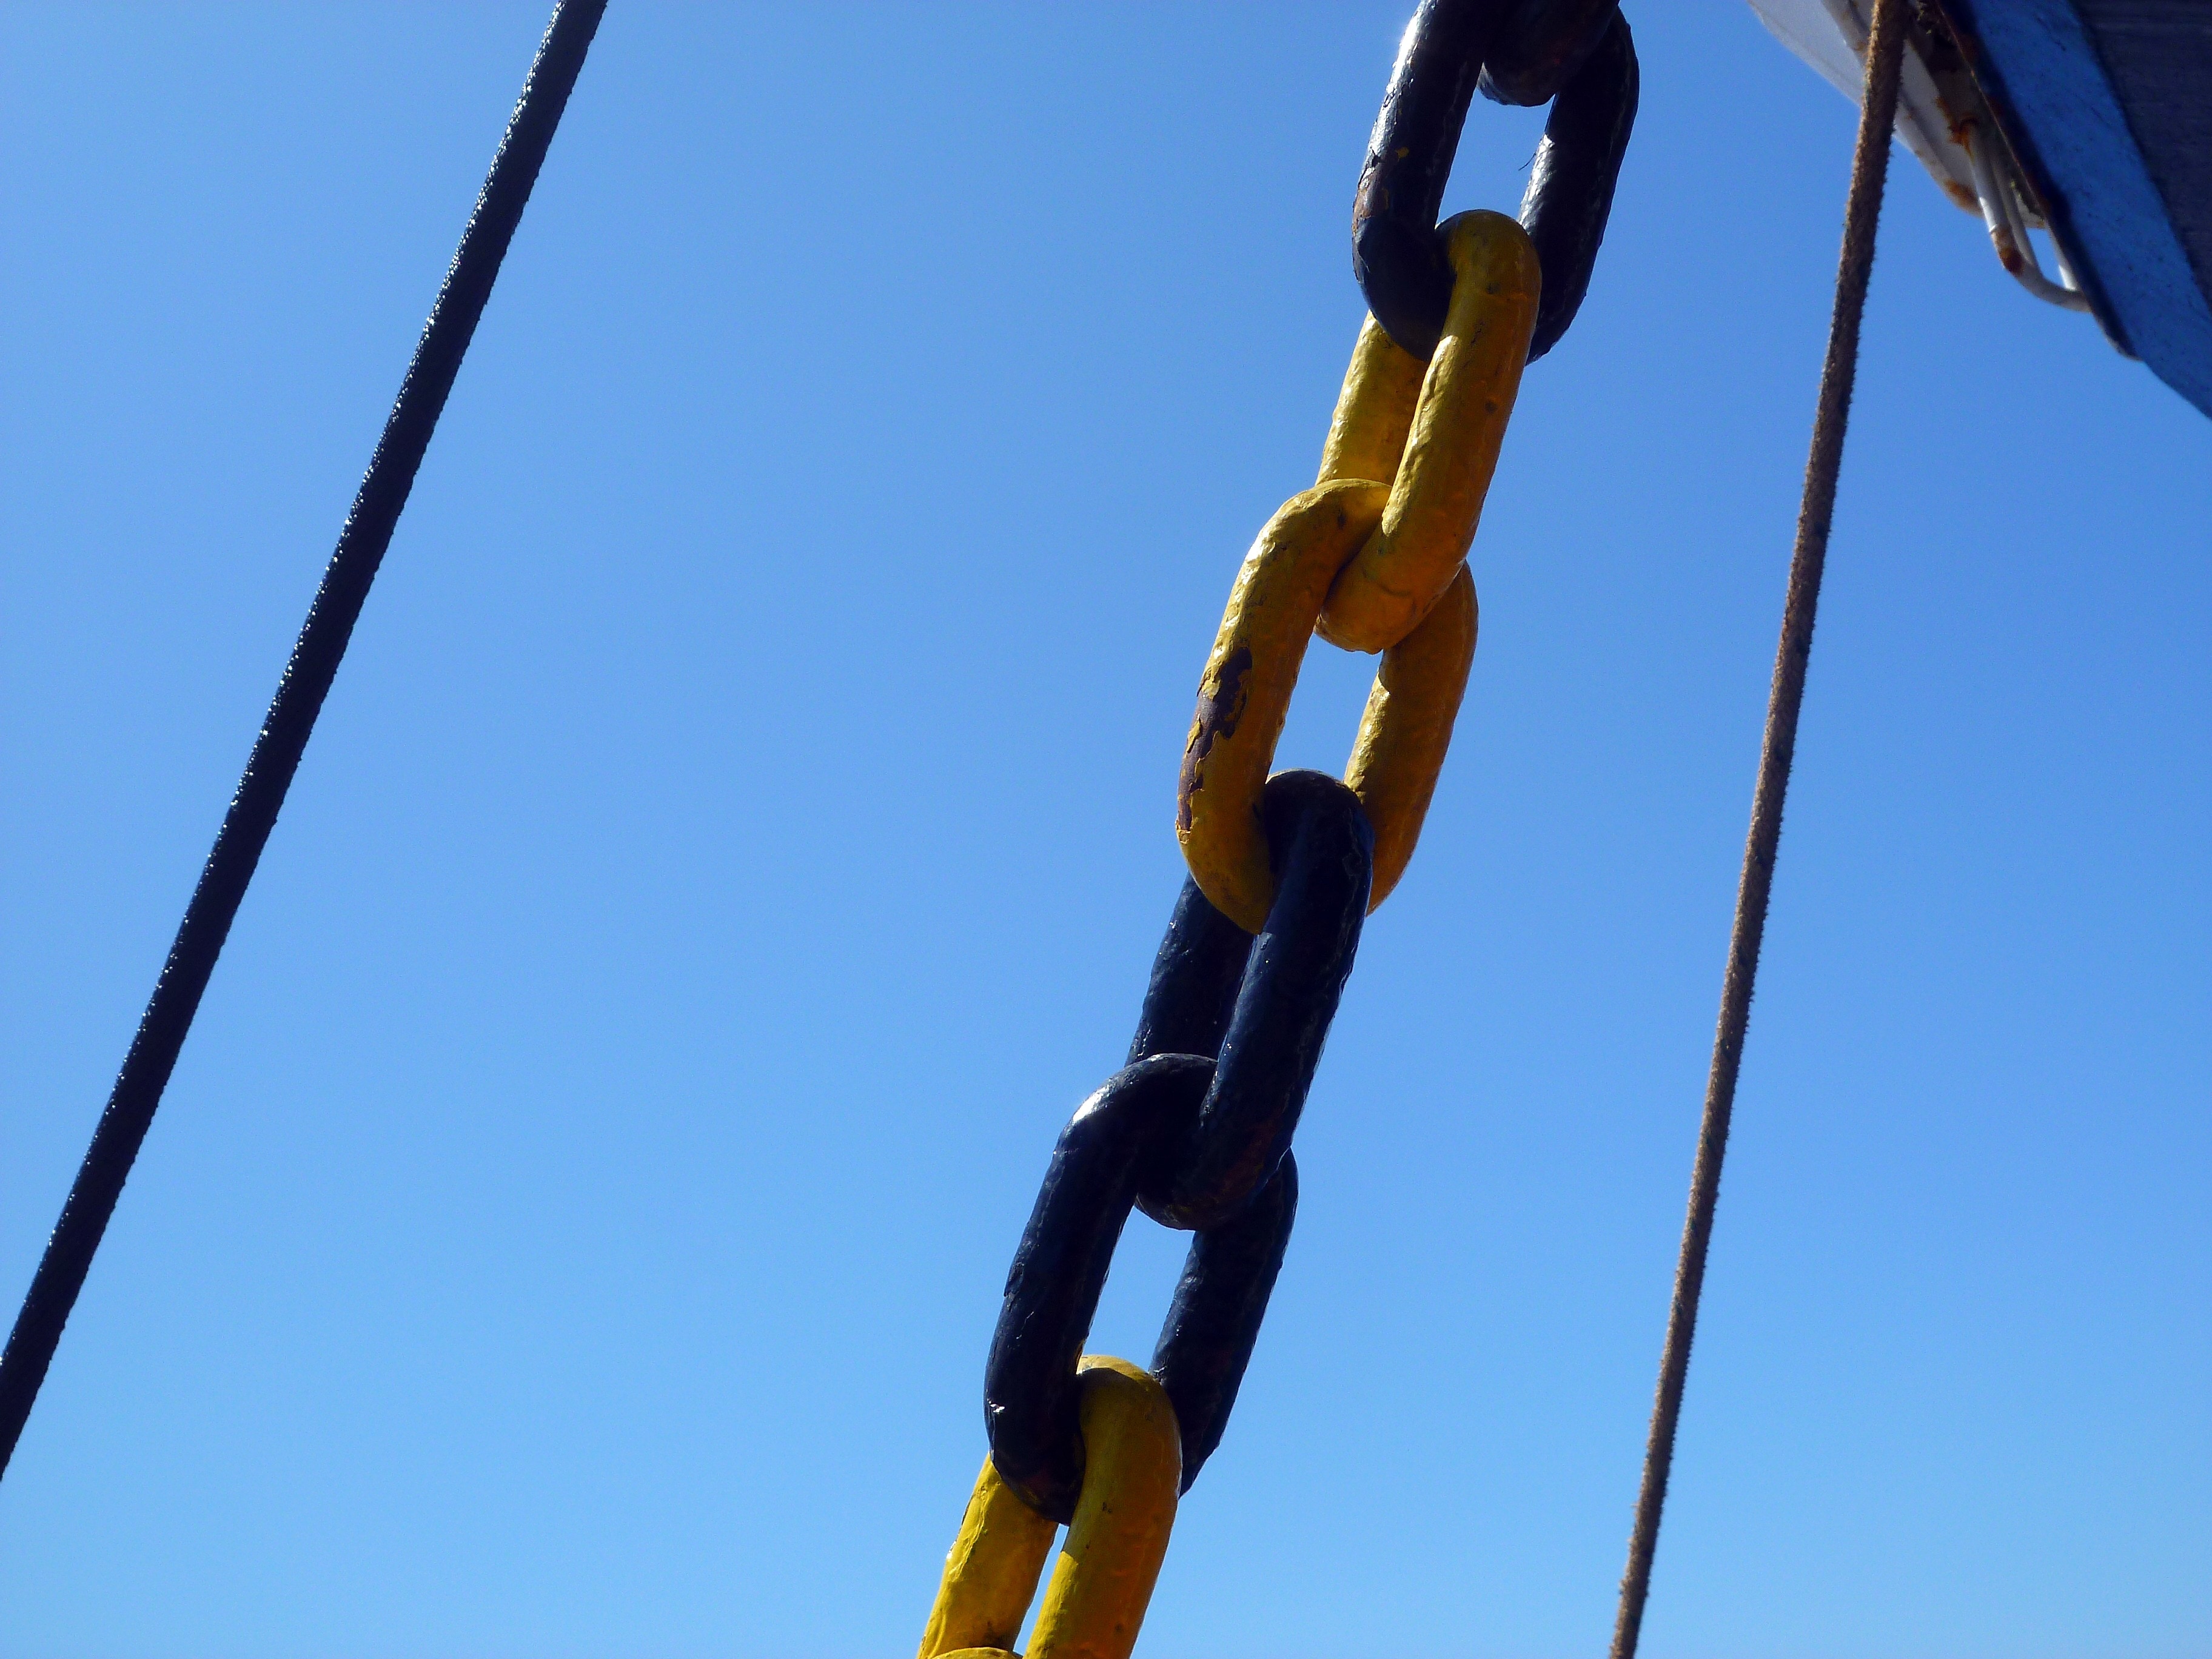 Transport, Chain, Ship, Rust, Travel, low angle view, blue